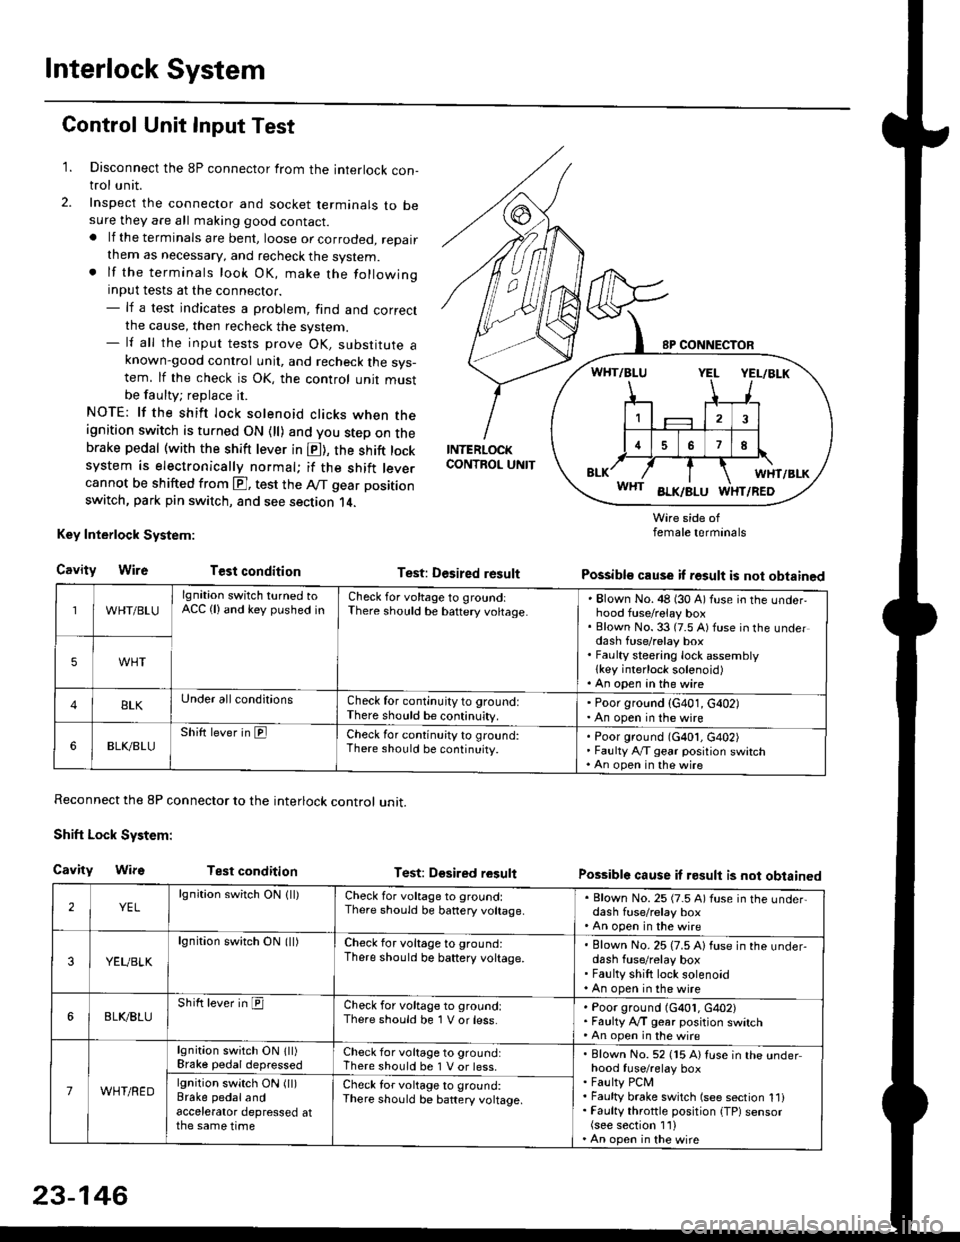 HONDA CIVIC 1996 6.G Service Manual Interlock System
Control Unit Input Test
1. Disconnect the 8P connector from the interlock con-trol unit.
2. Inspect the connector and socket terminals to besure they are all making good contact.. lf 